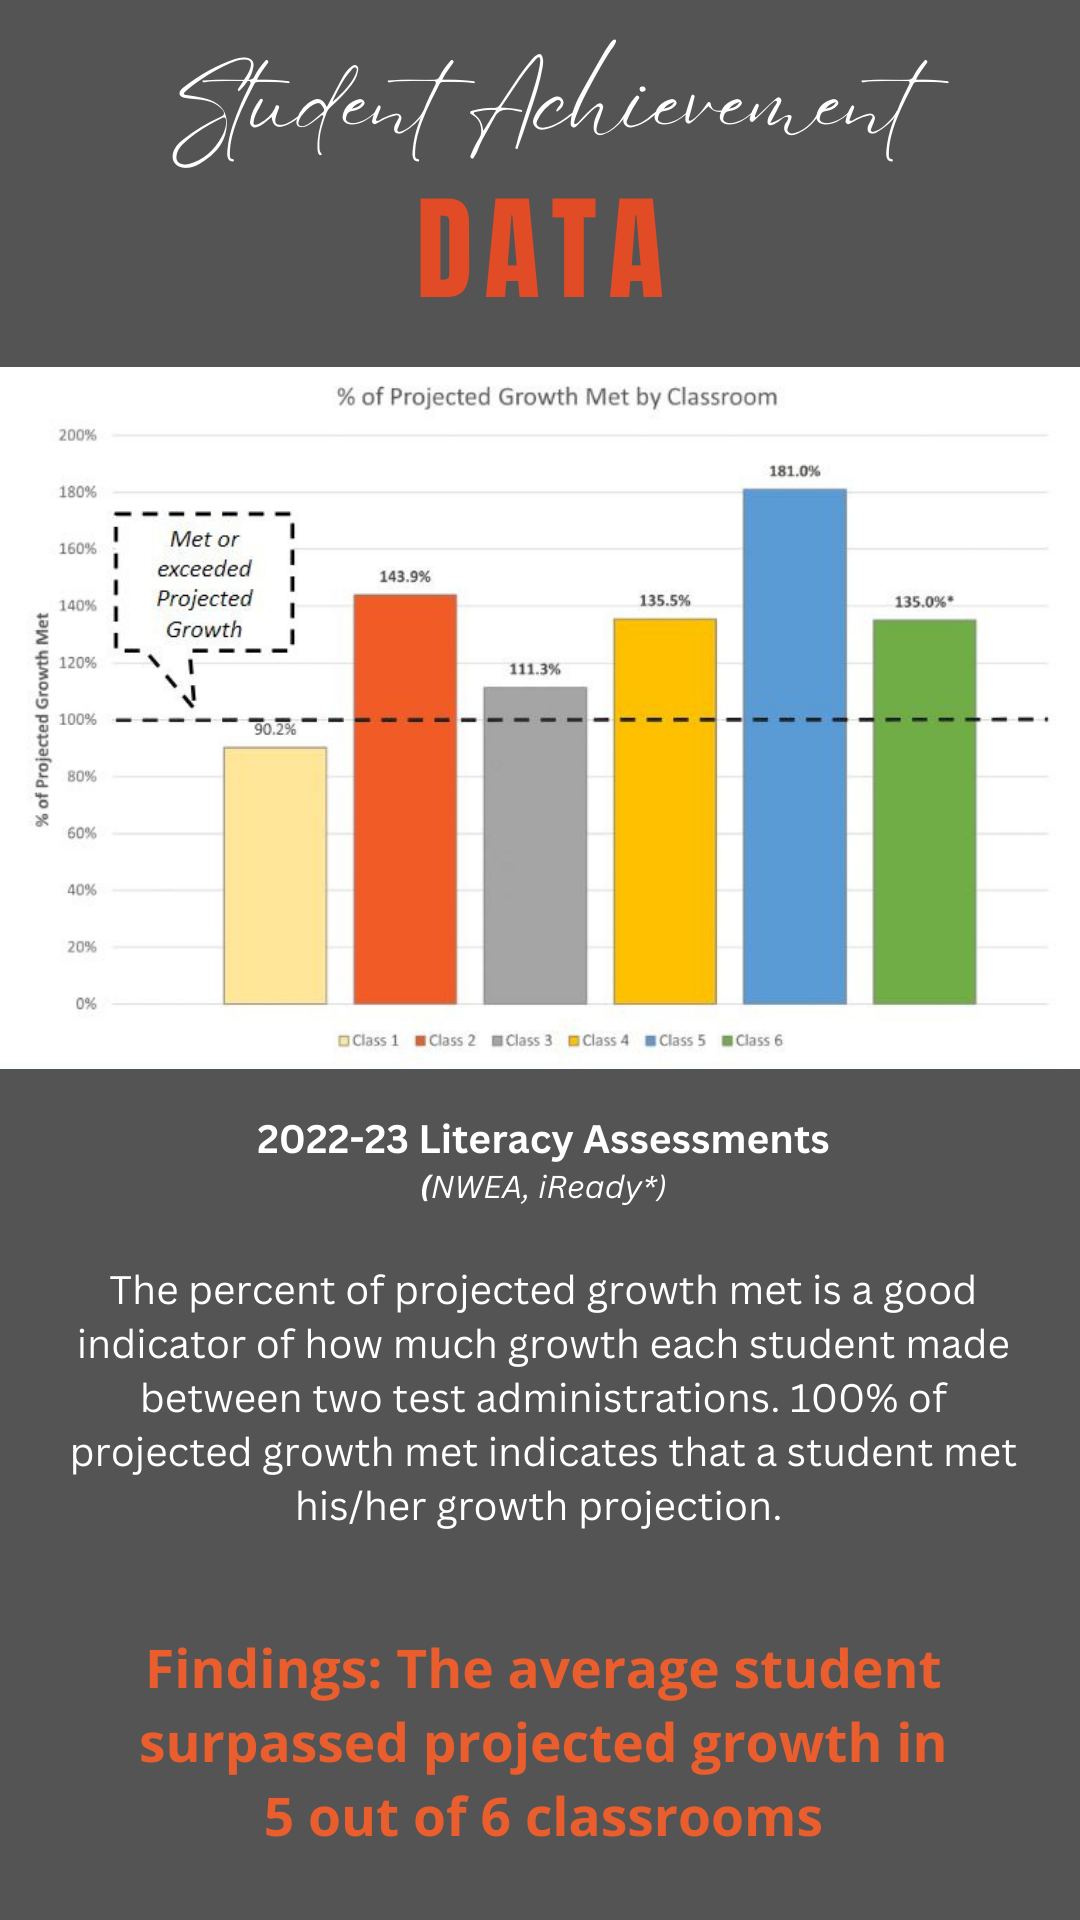 Student Achievement Data Chart shows % of Projected Growth Met by Classroom. Findings: The average student surpassed projected growth in 5 out of 6 classrooms. Email amandawalma@kentisd.org for a copy of the image.